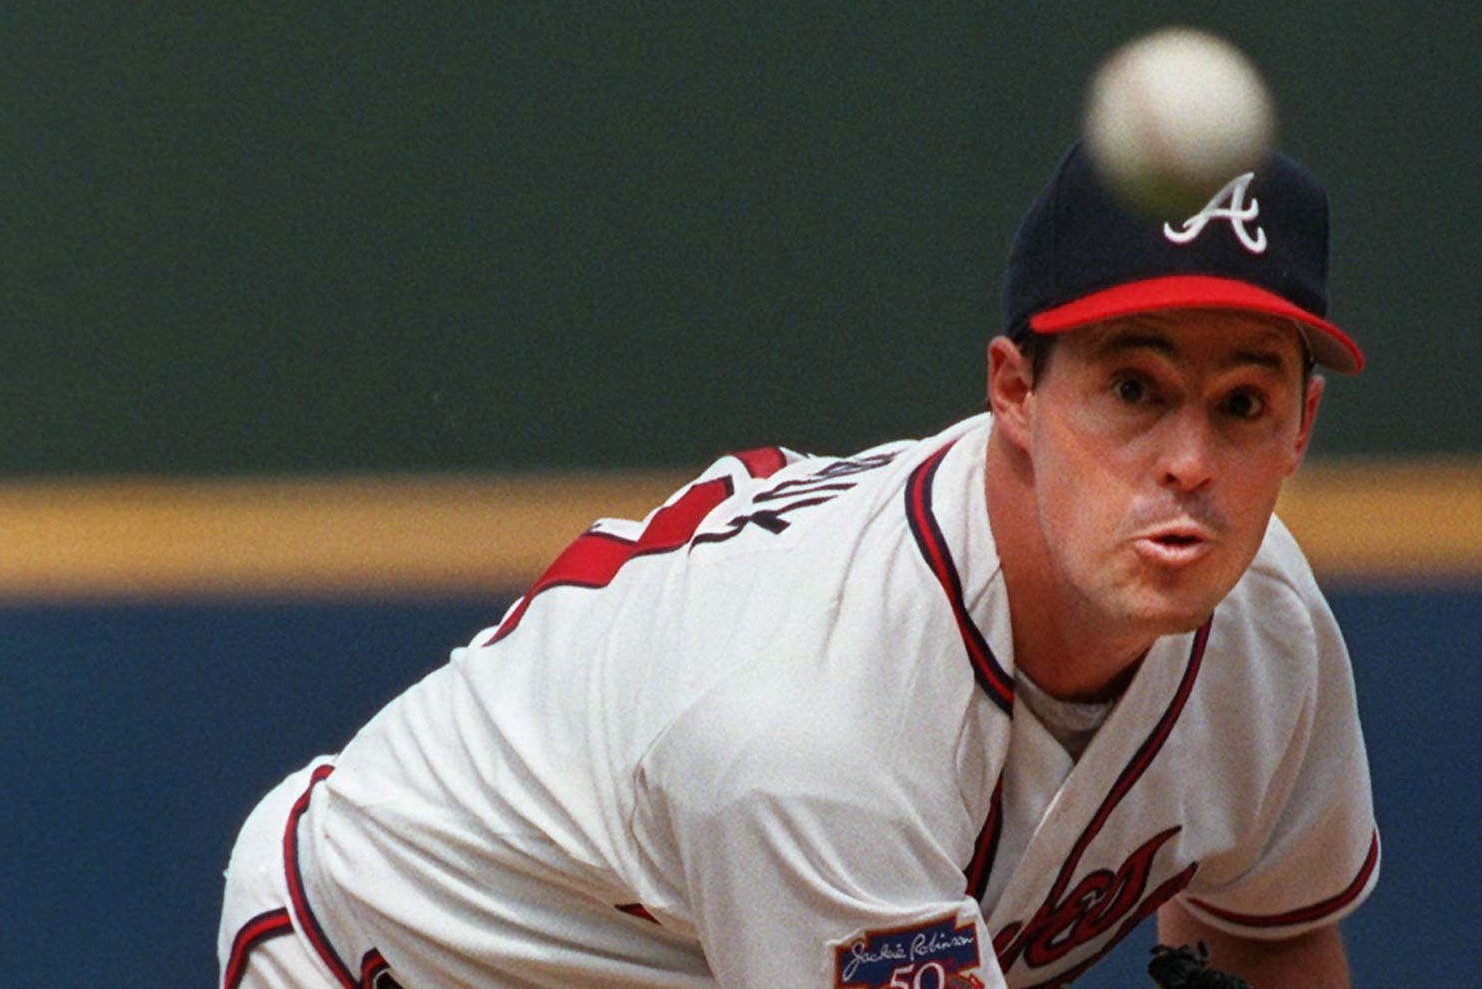 MLB Hall of Fame pitcher Greg Maddux makes appearance during